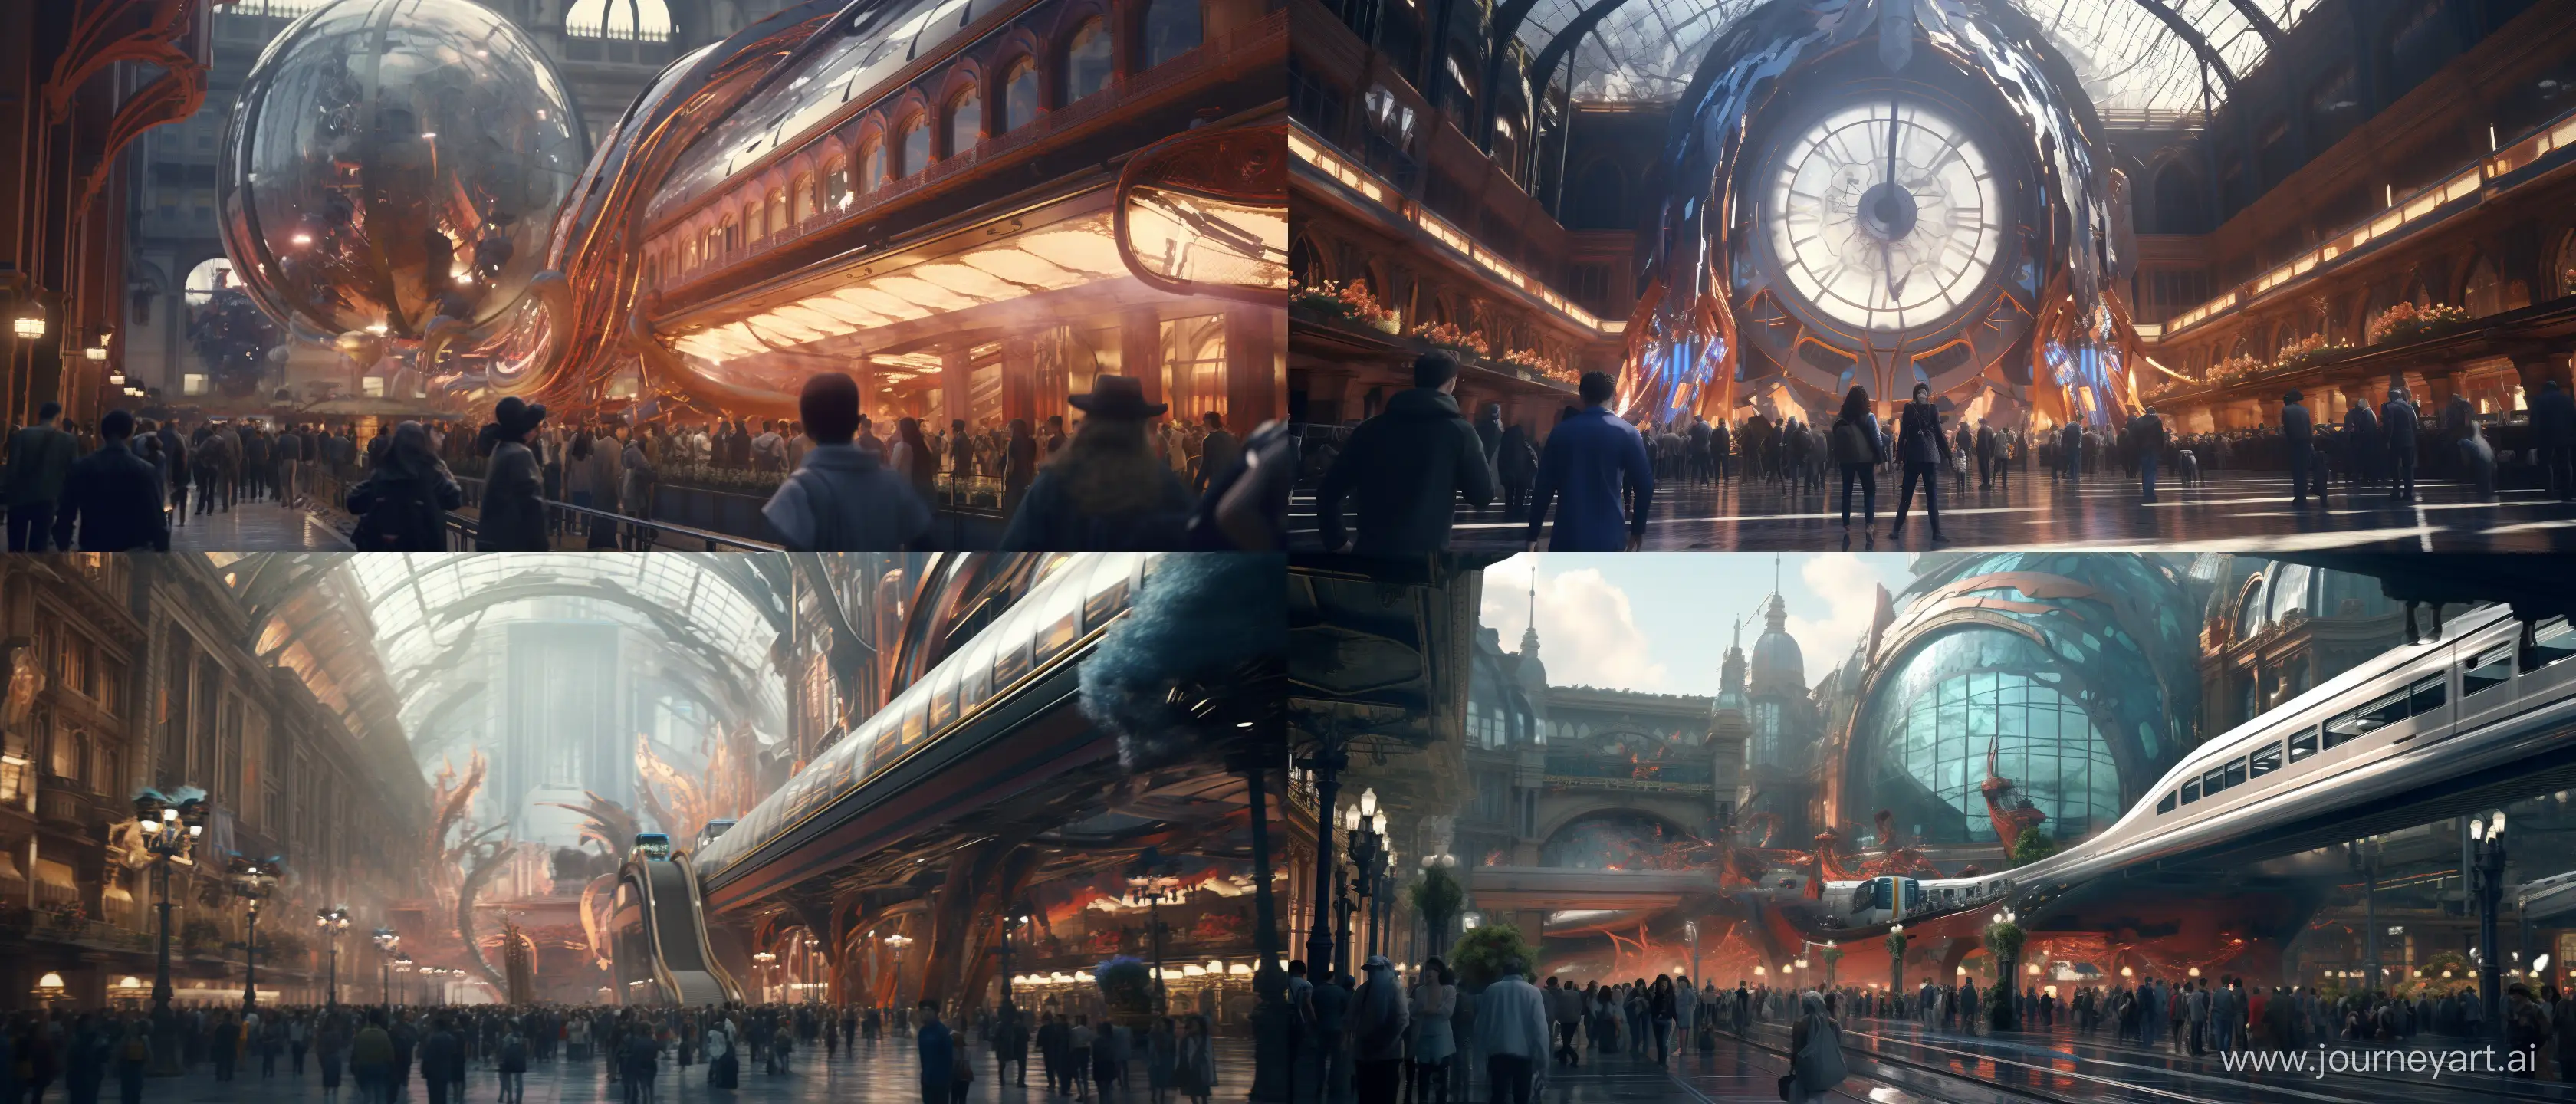 https://live.staticflickr.com/65535/28750503495_b19bb37f2a_b.jpg, Craft a Cybernetic Surrealism-inspired digital artwork of central station with dense crowd set at 2077 ultra realistic 4k cinematic --ar 21:9 --iw .1